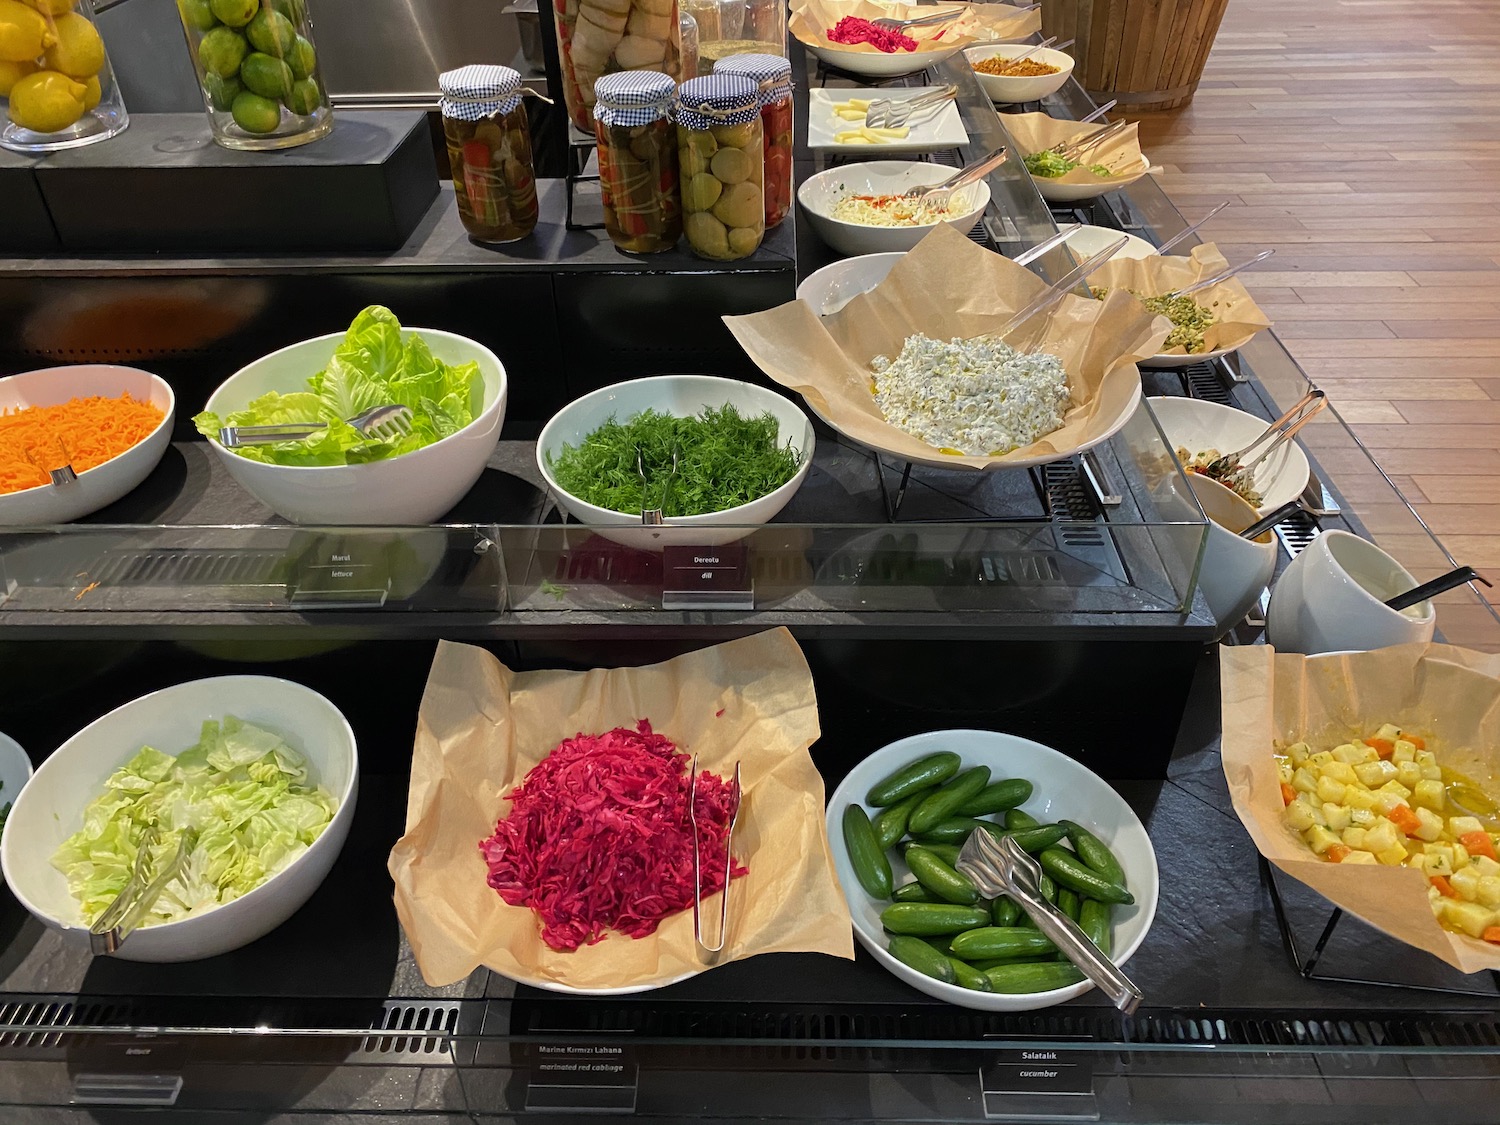 a display of salads and vegetables